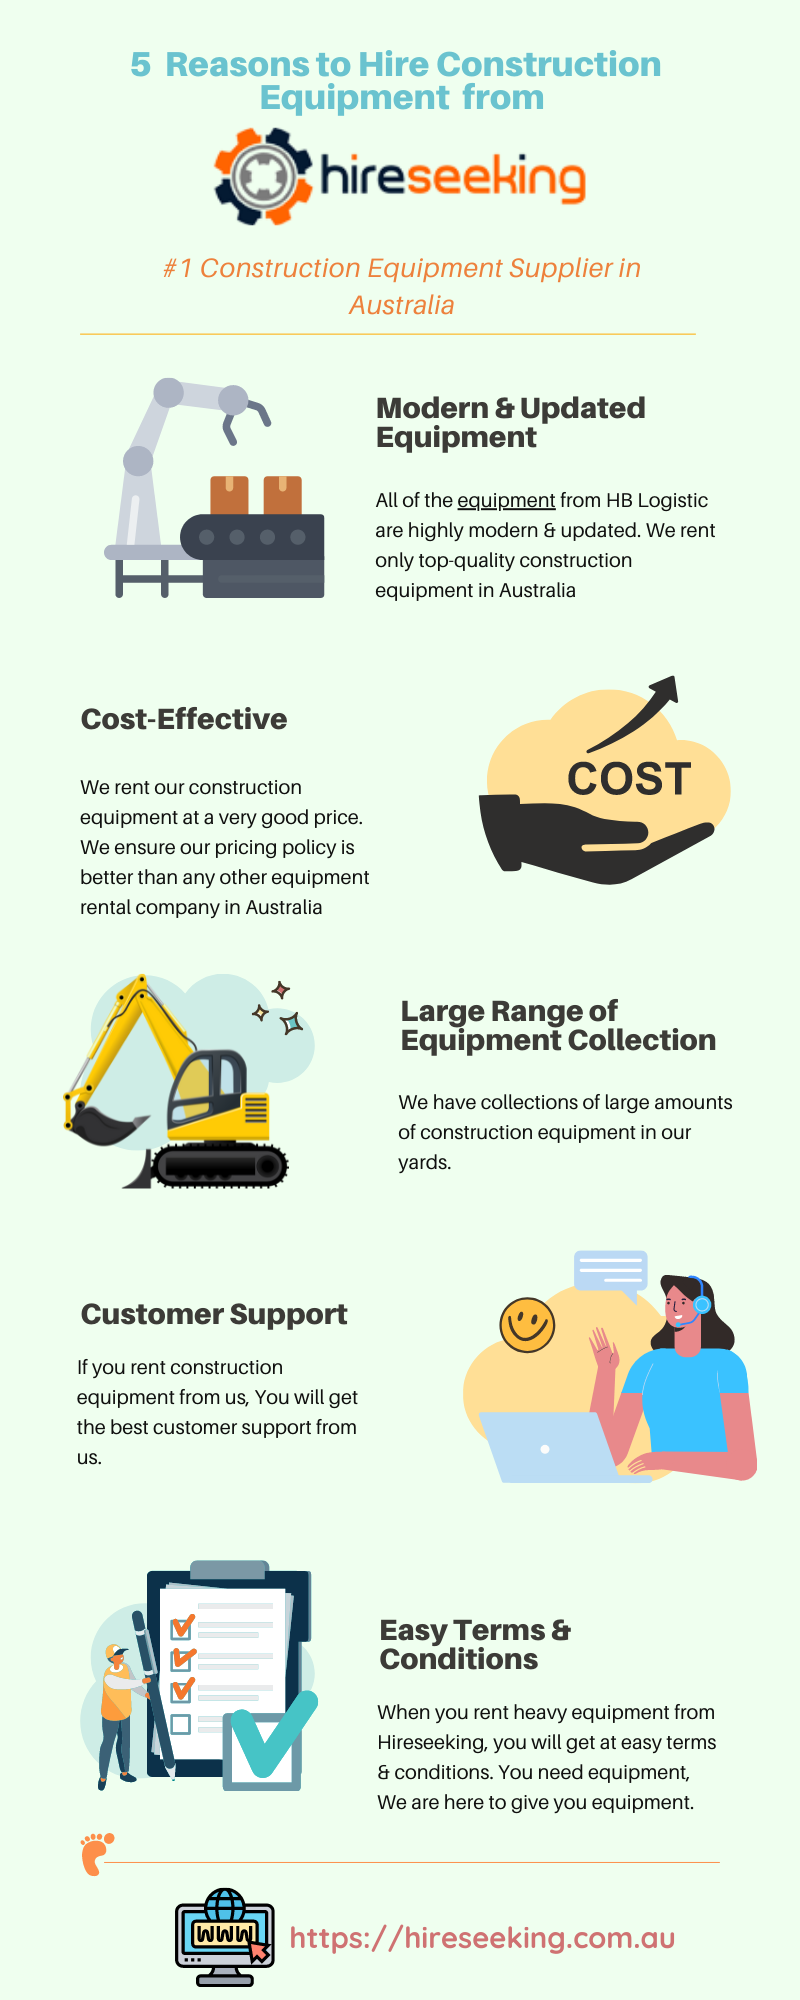 5 Simple Reason to Hire Construction Equipment from Hireseeking